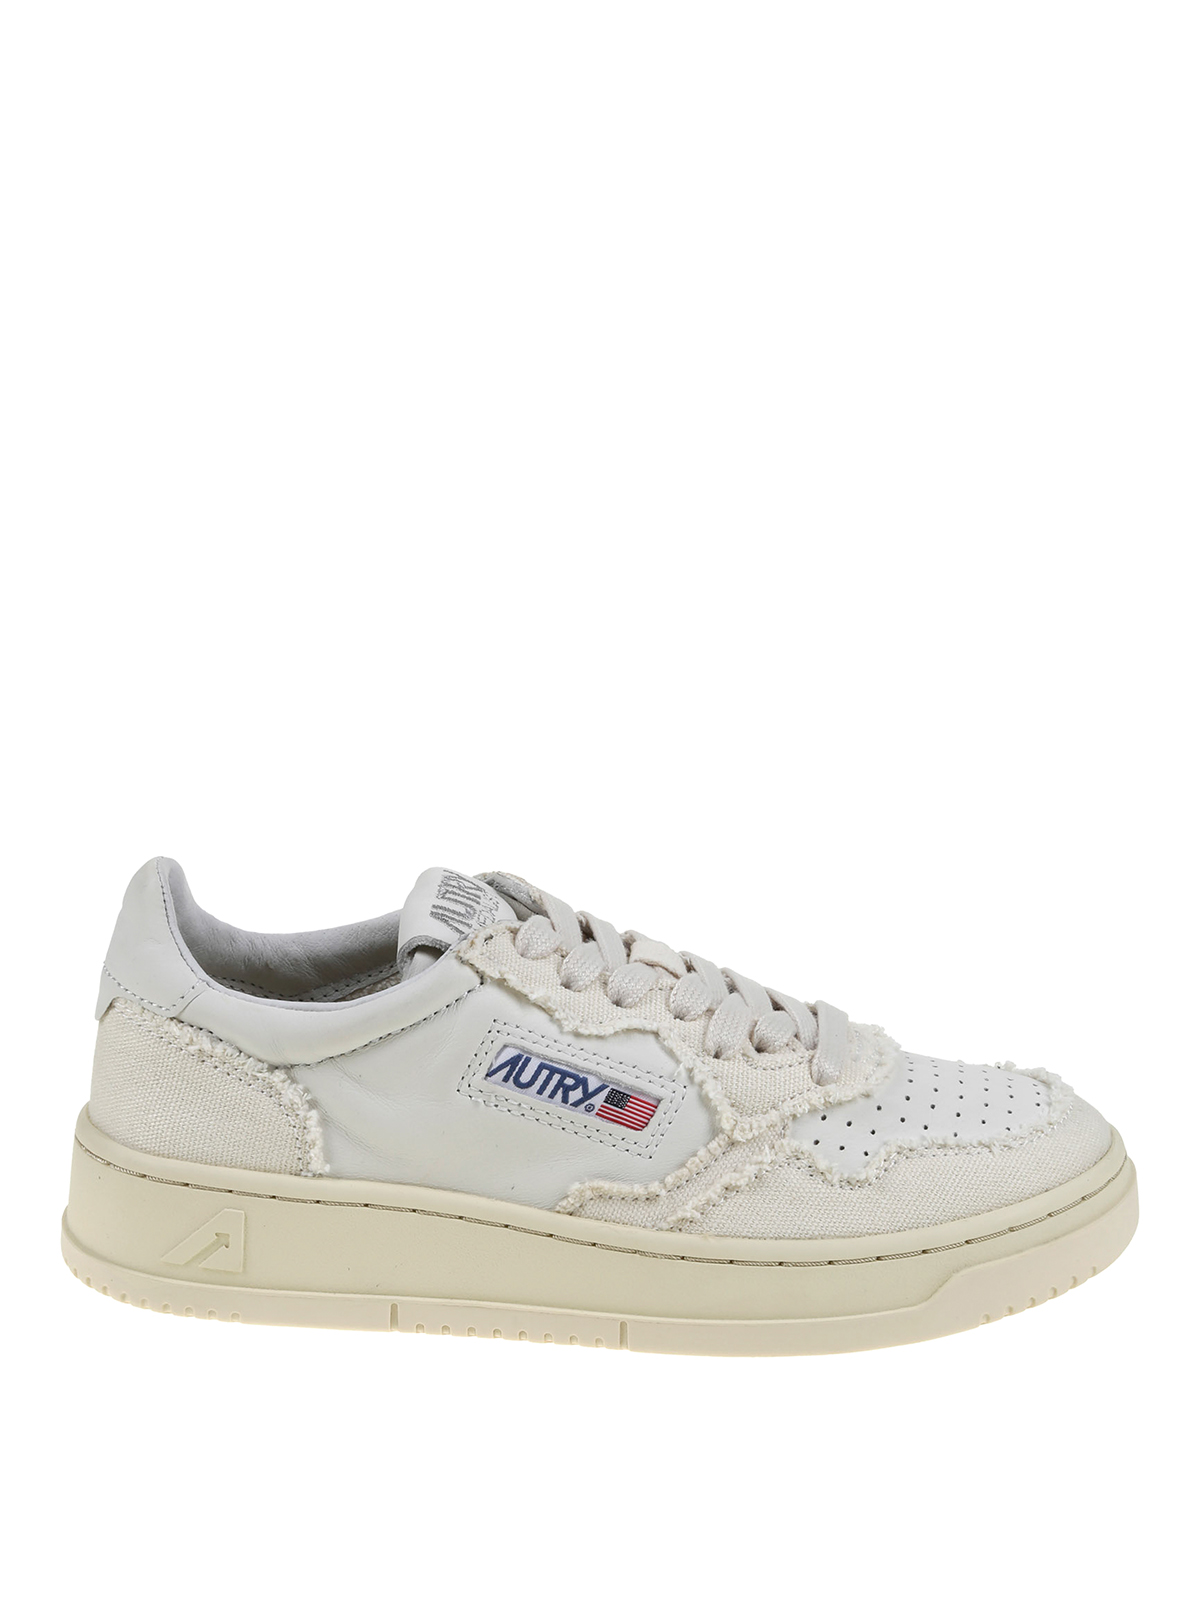 Autry 01 Low Canvas In White